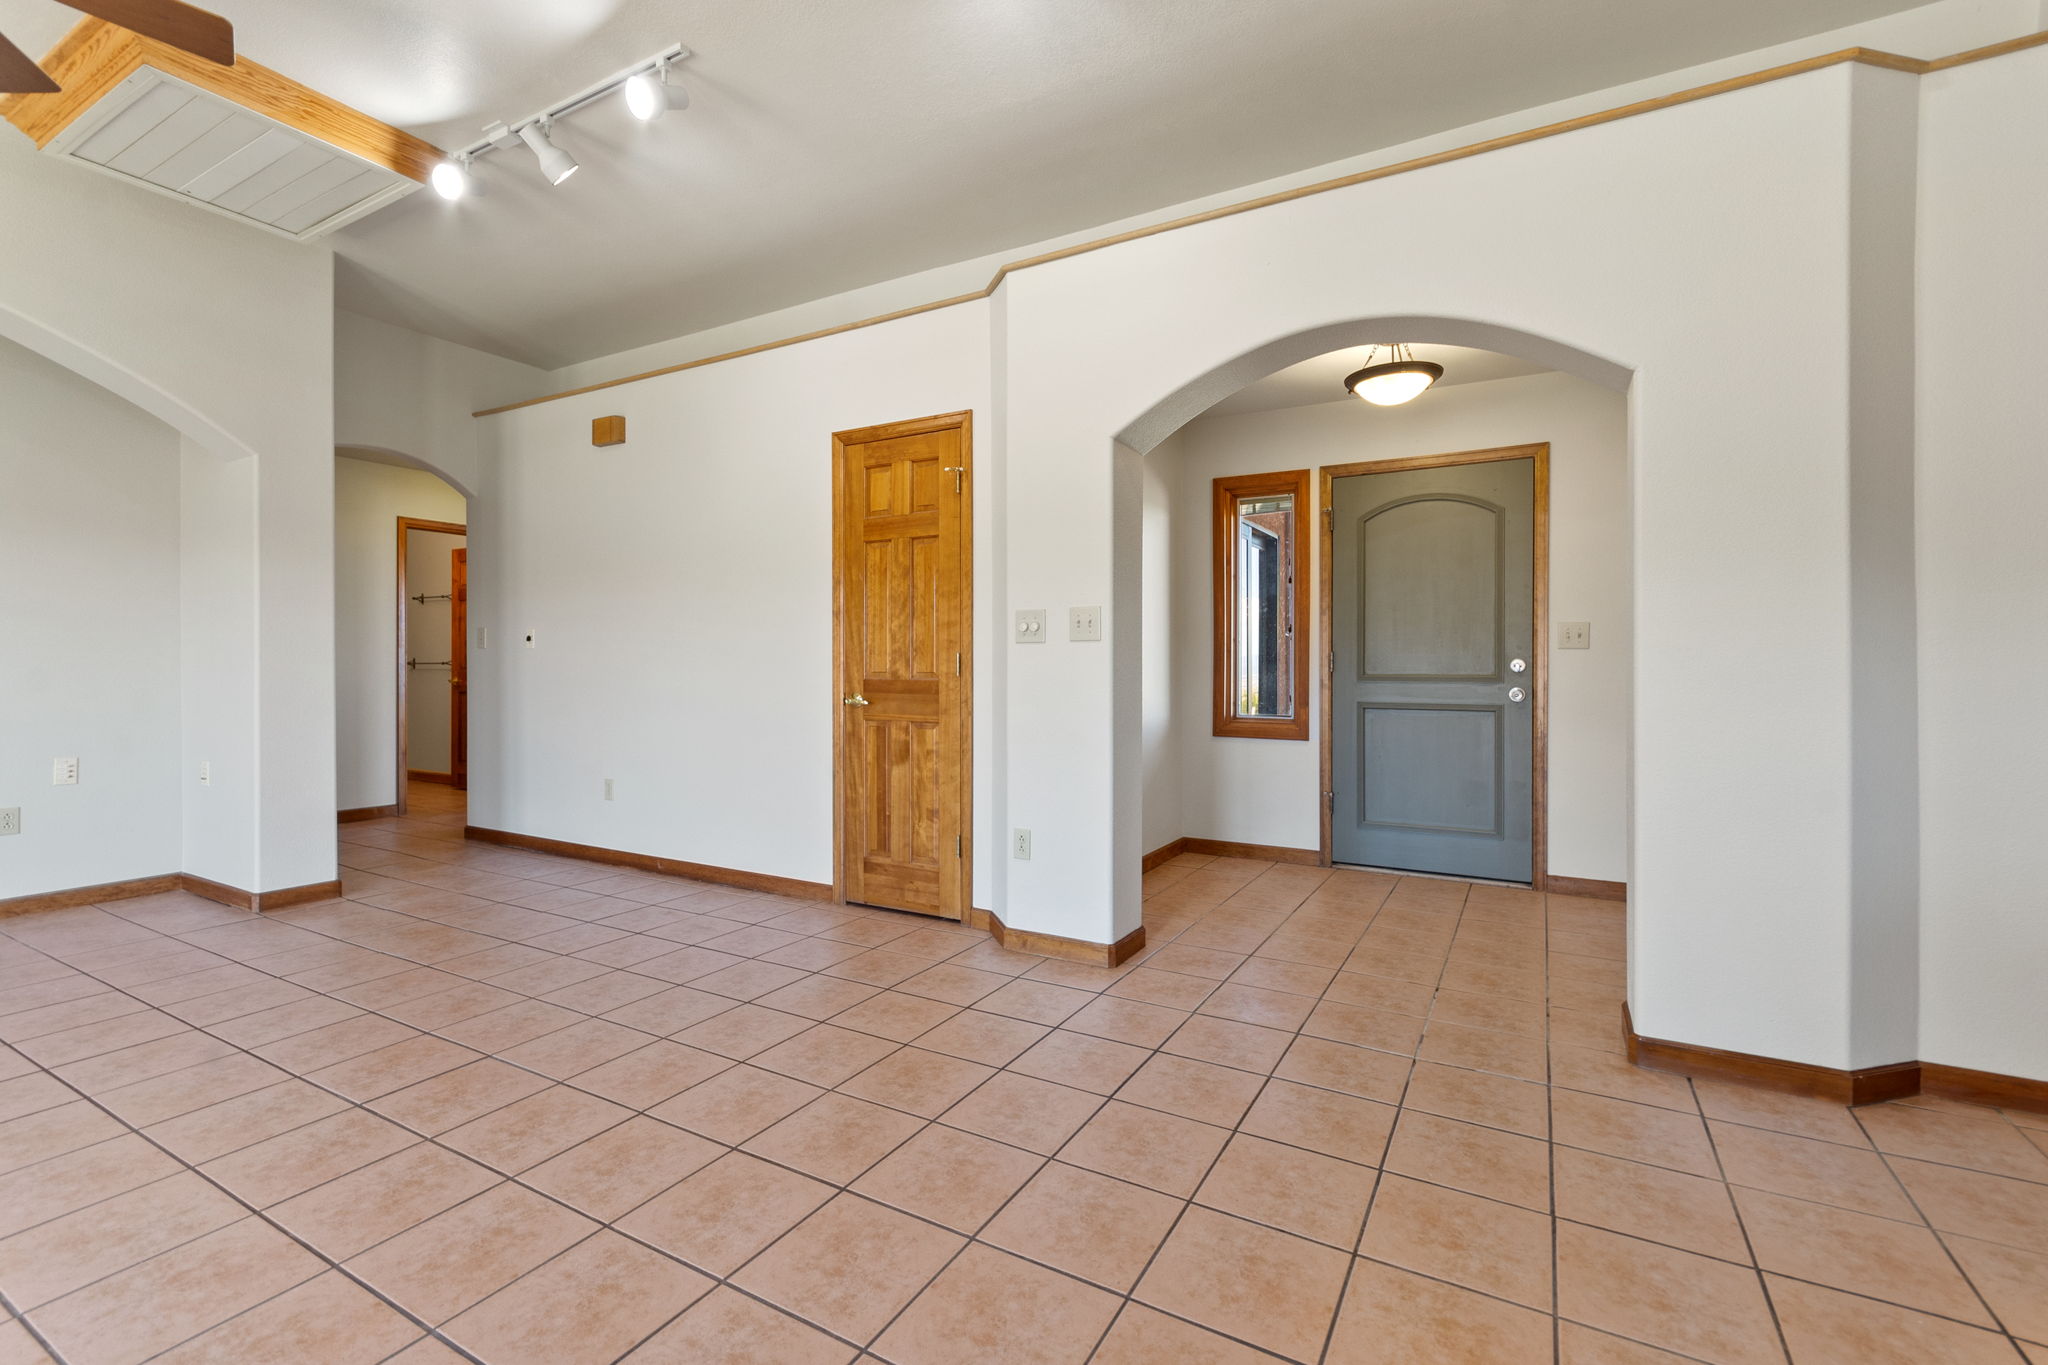  460 Co Rd 290, Florence, CO 81226, US Photo 19